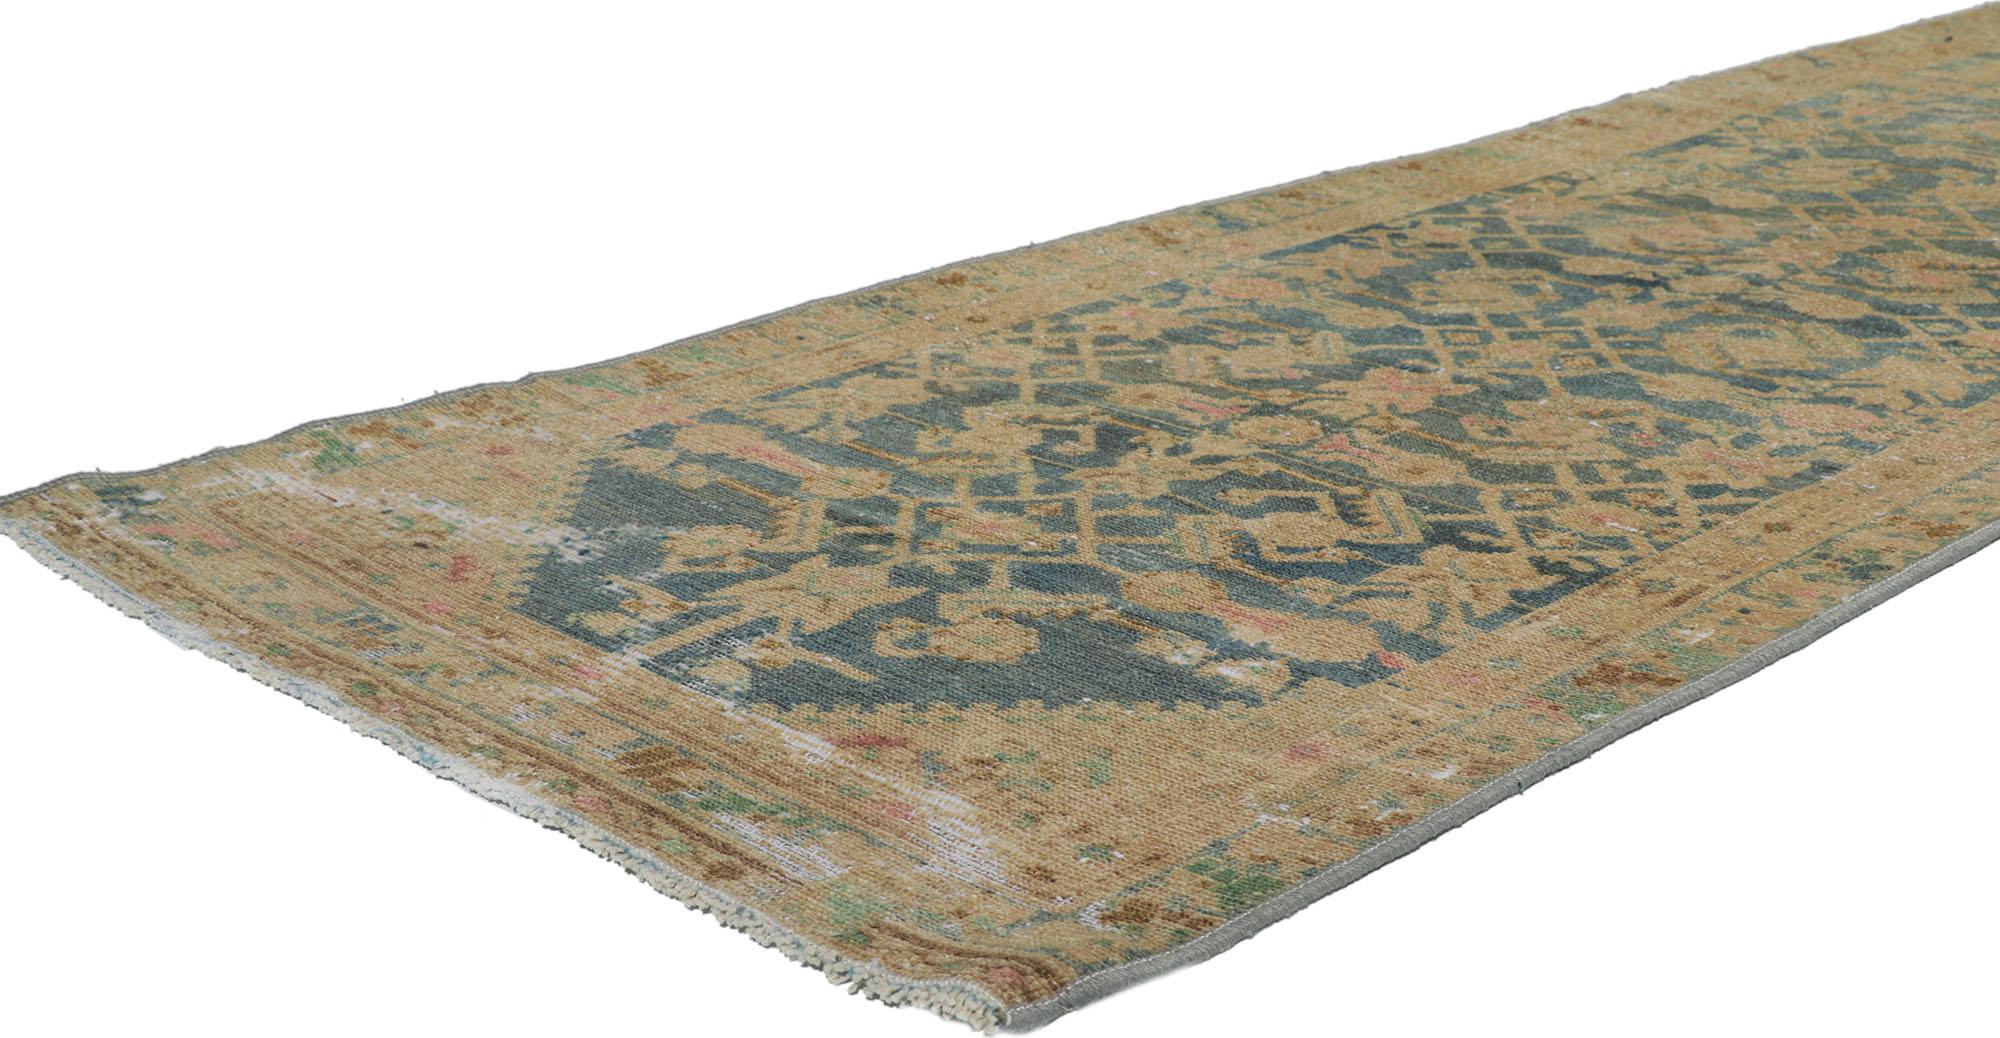 60992 Antique Persian Malayer Rug Runner, 03'00 x 12'02.
Subtle sophistication meets boho enchantment in in this hand knotted wool distressed antique Persian Malayer runner. Let yourself be whisked away on a mystical journey of enigmatic elegance,